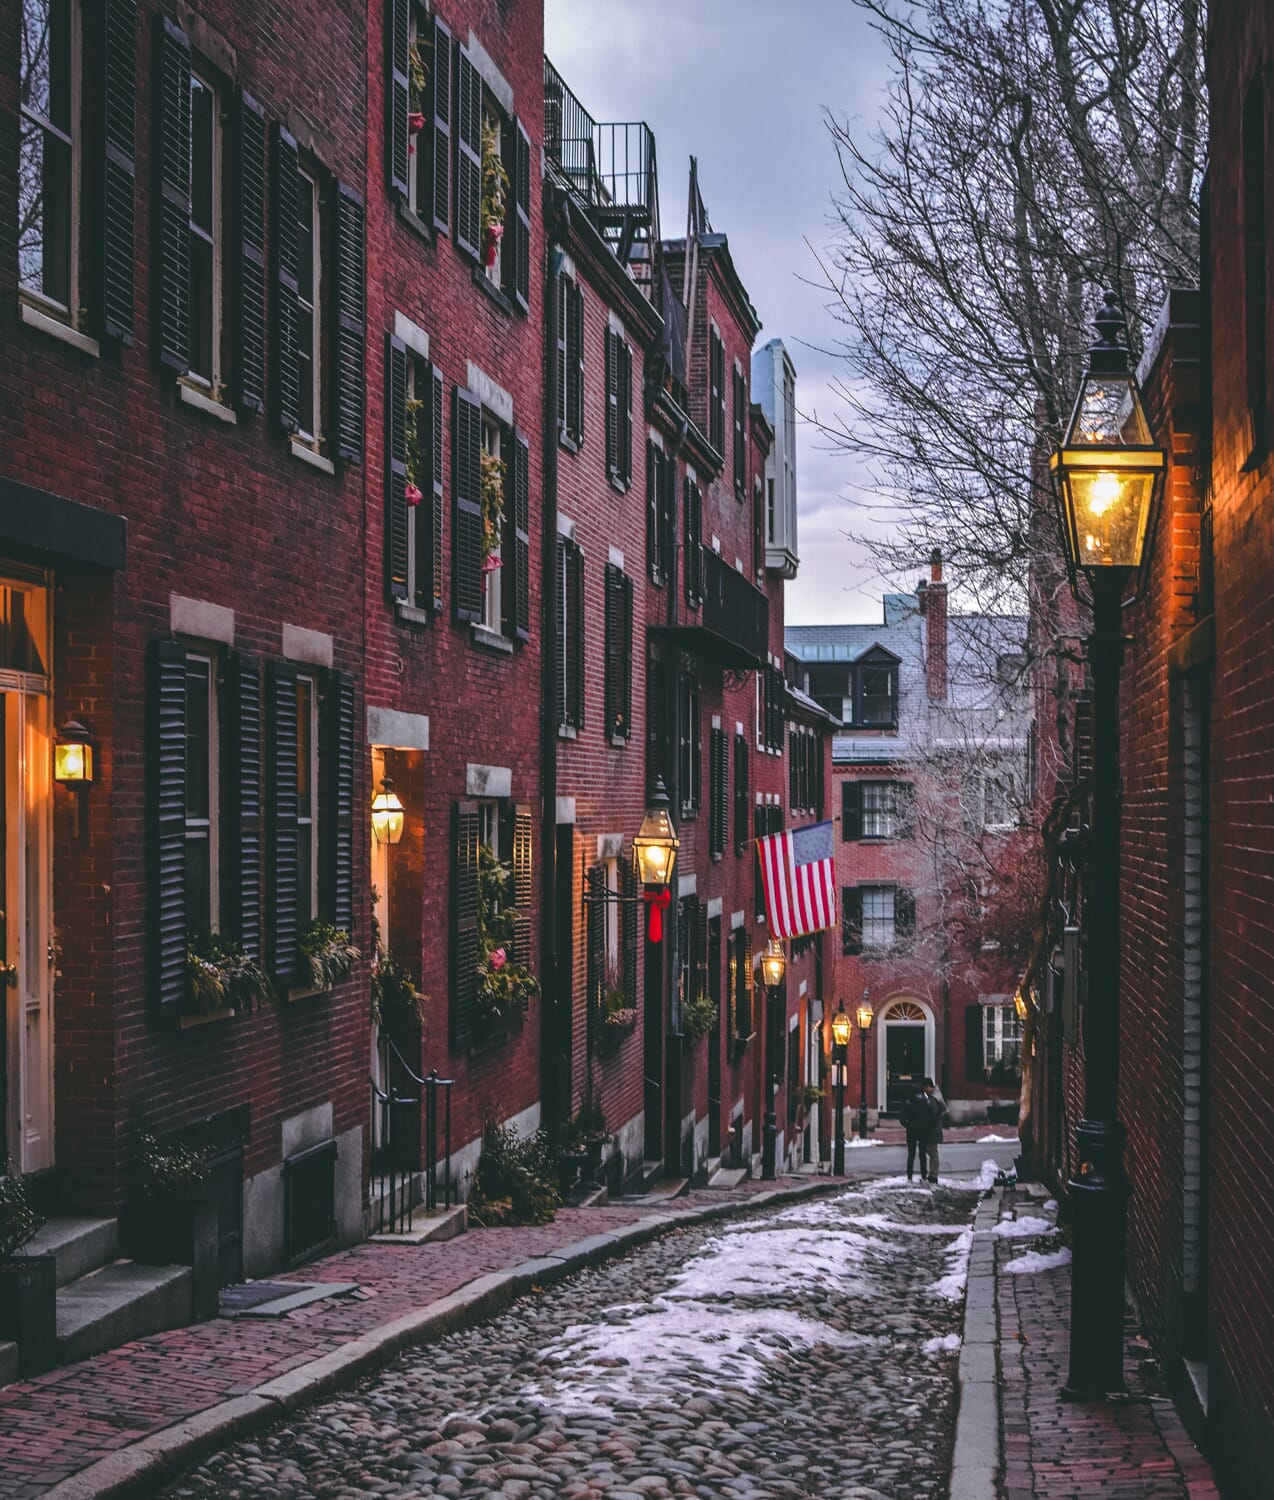 10 Best Spots for Photography in Boston - PhotoWorkout